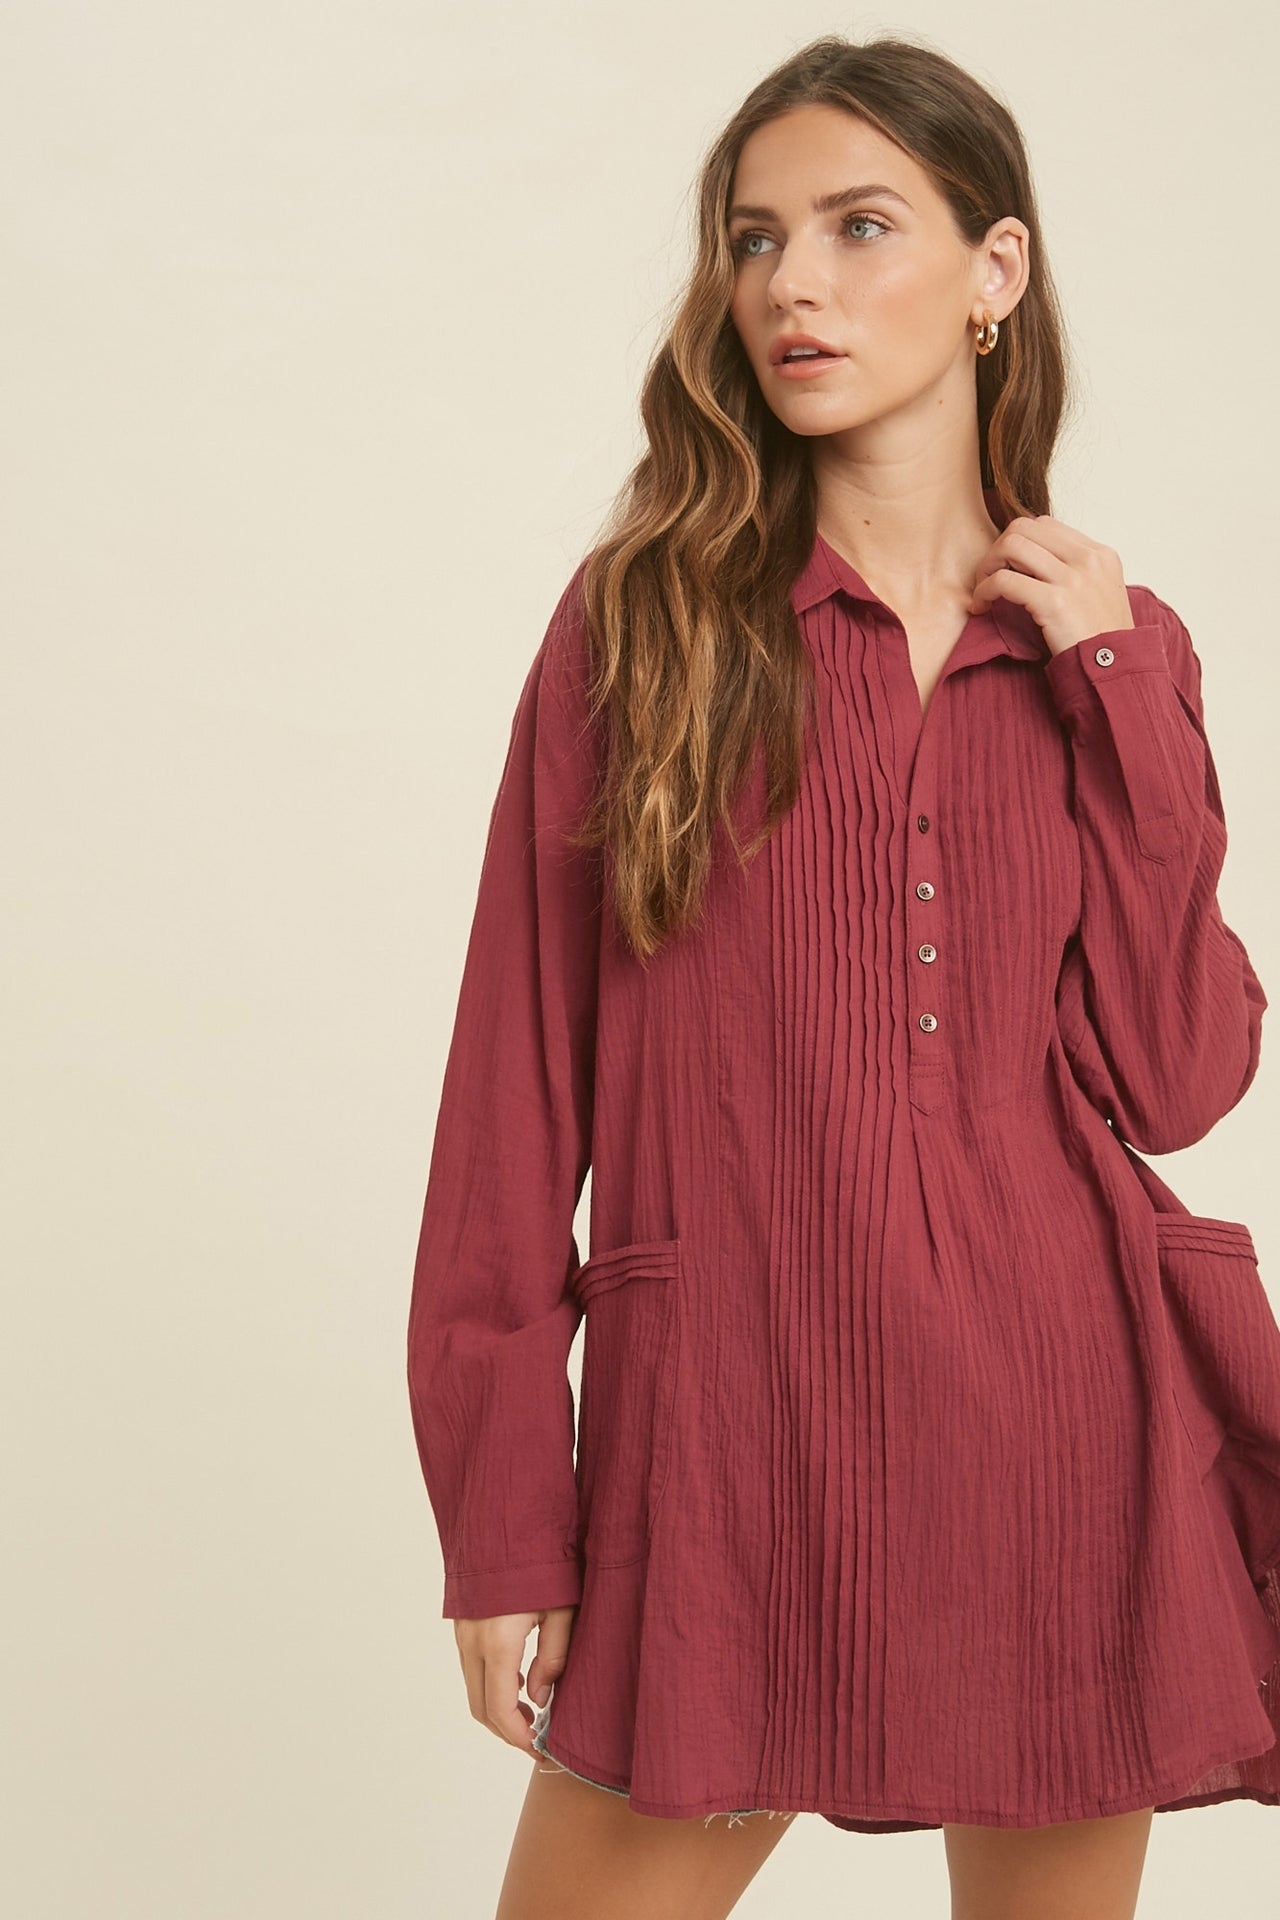 Showing a model wearing the Button Down Tunic Top in sienna color.